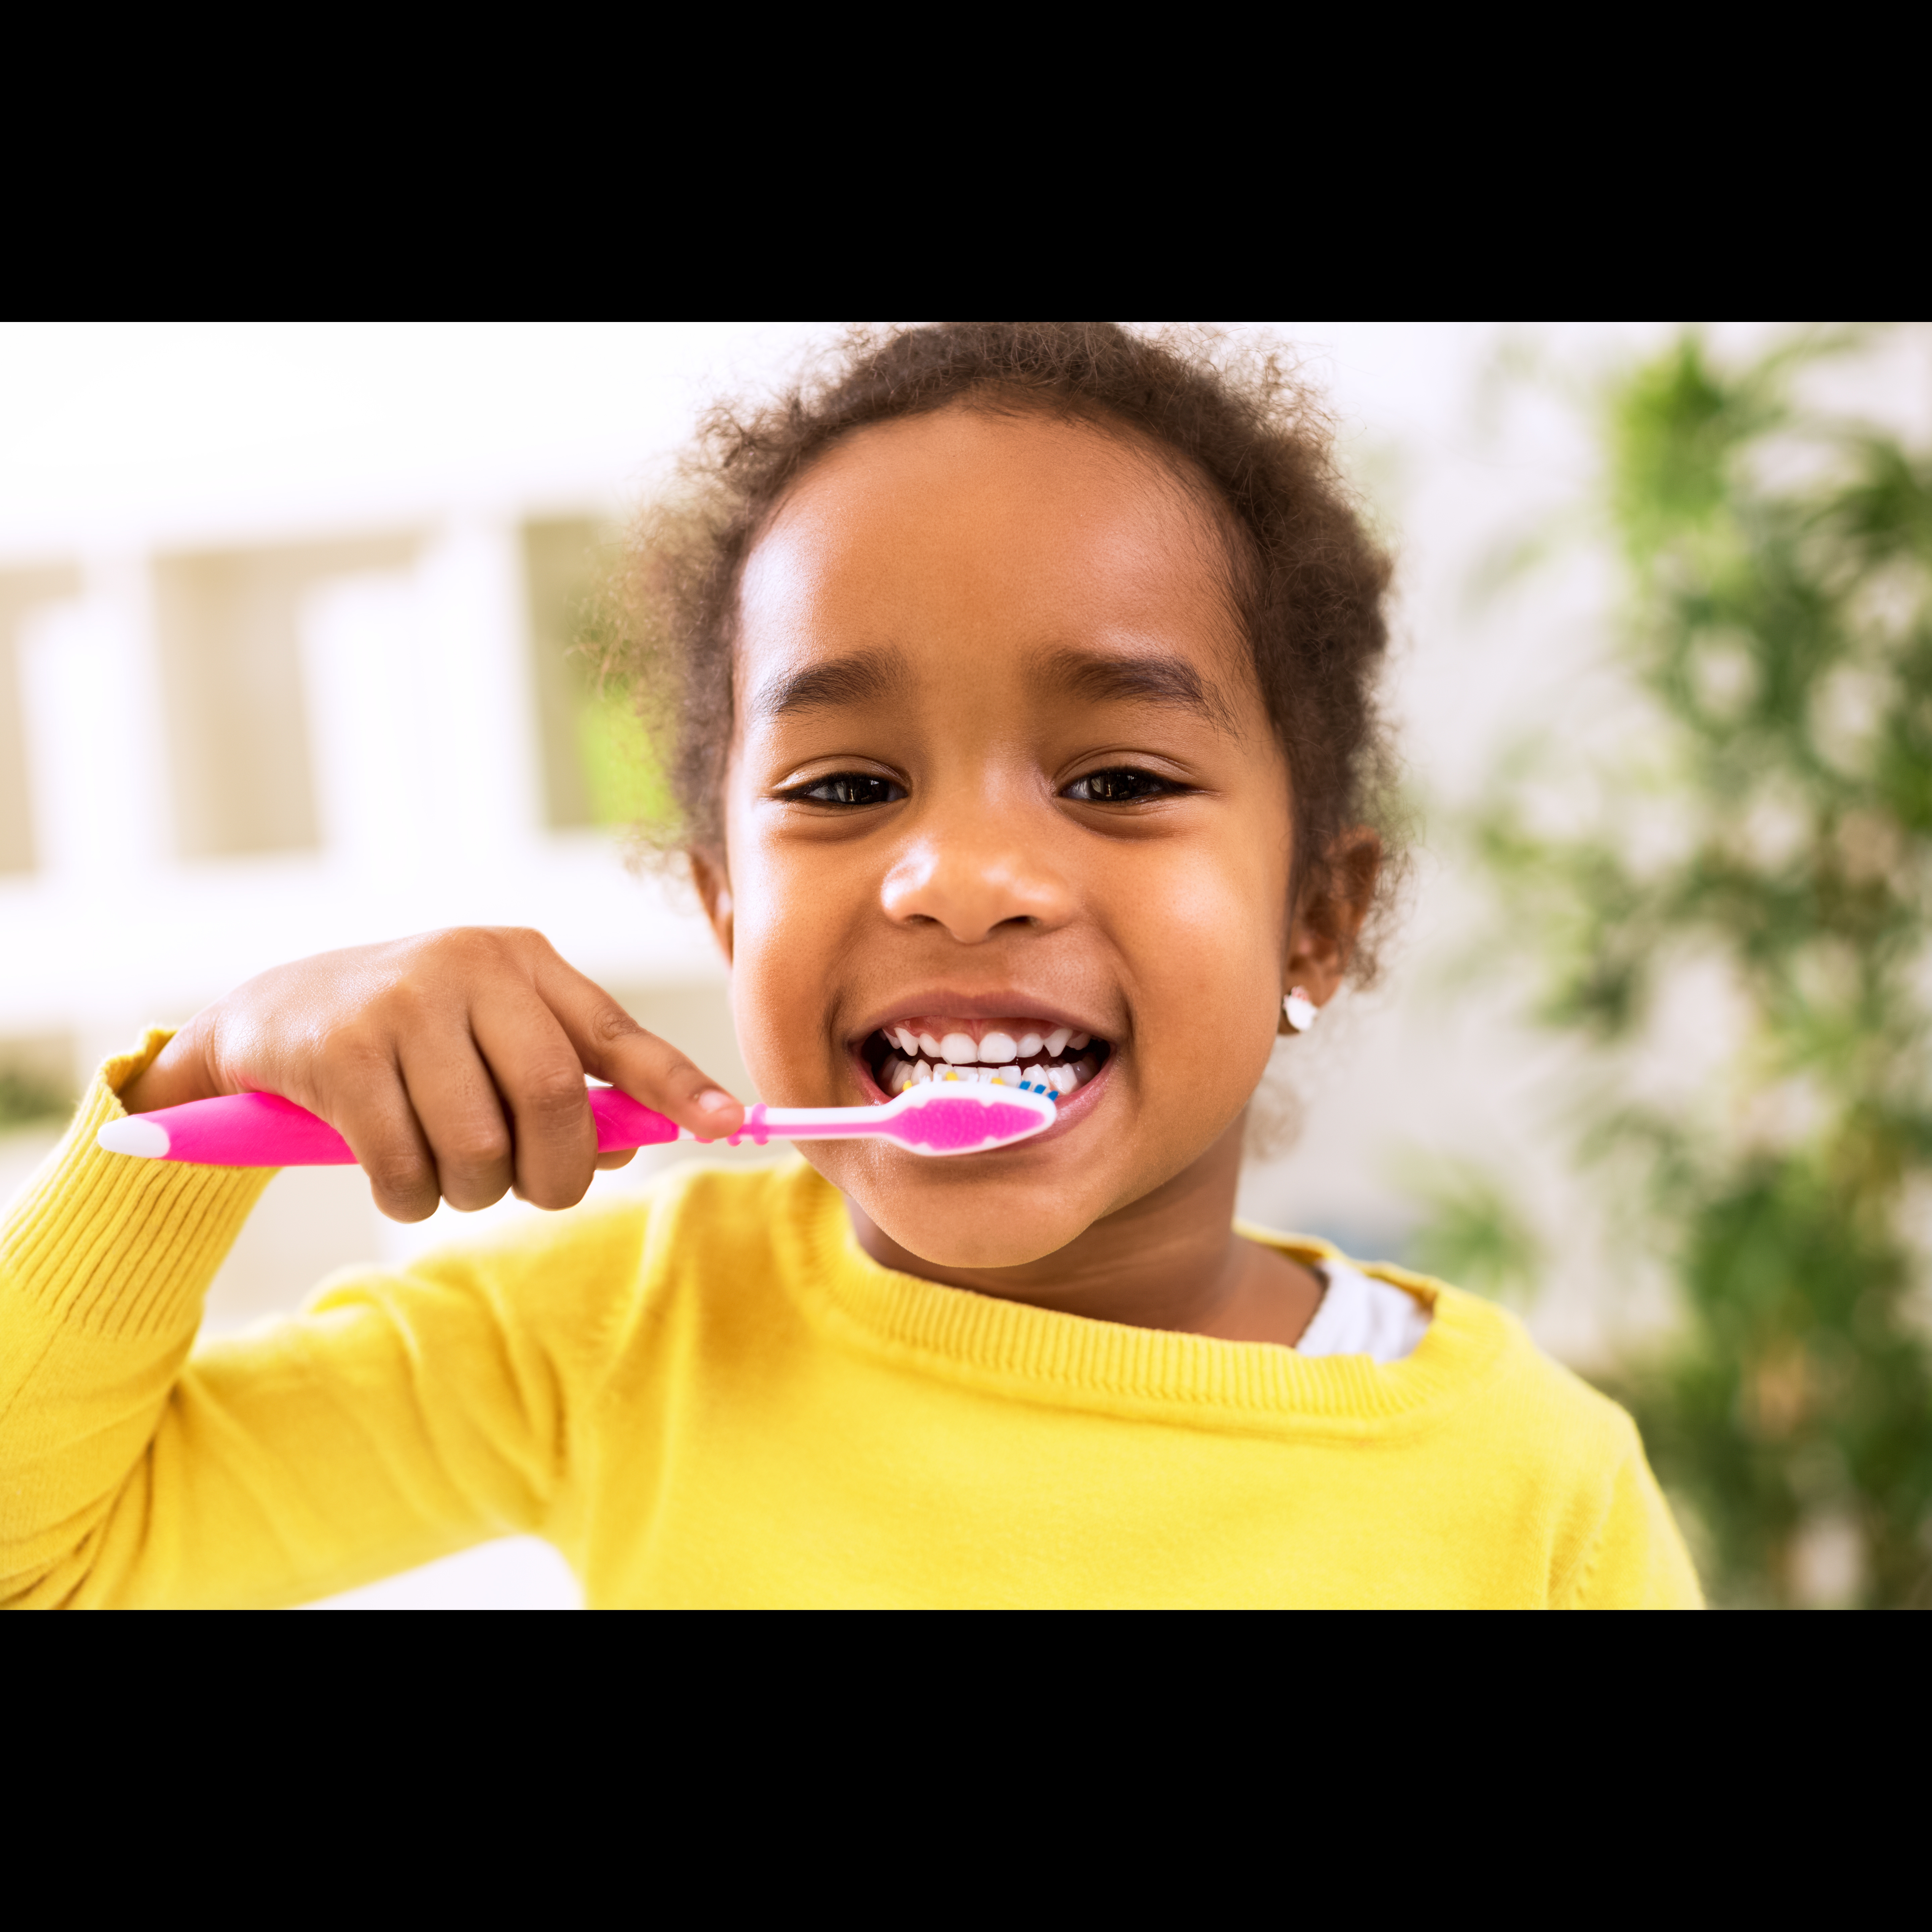 Excipients for Oral Health products